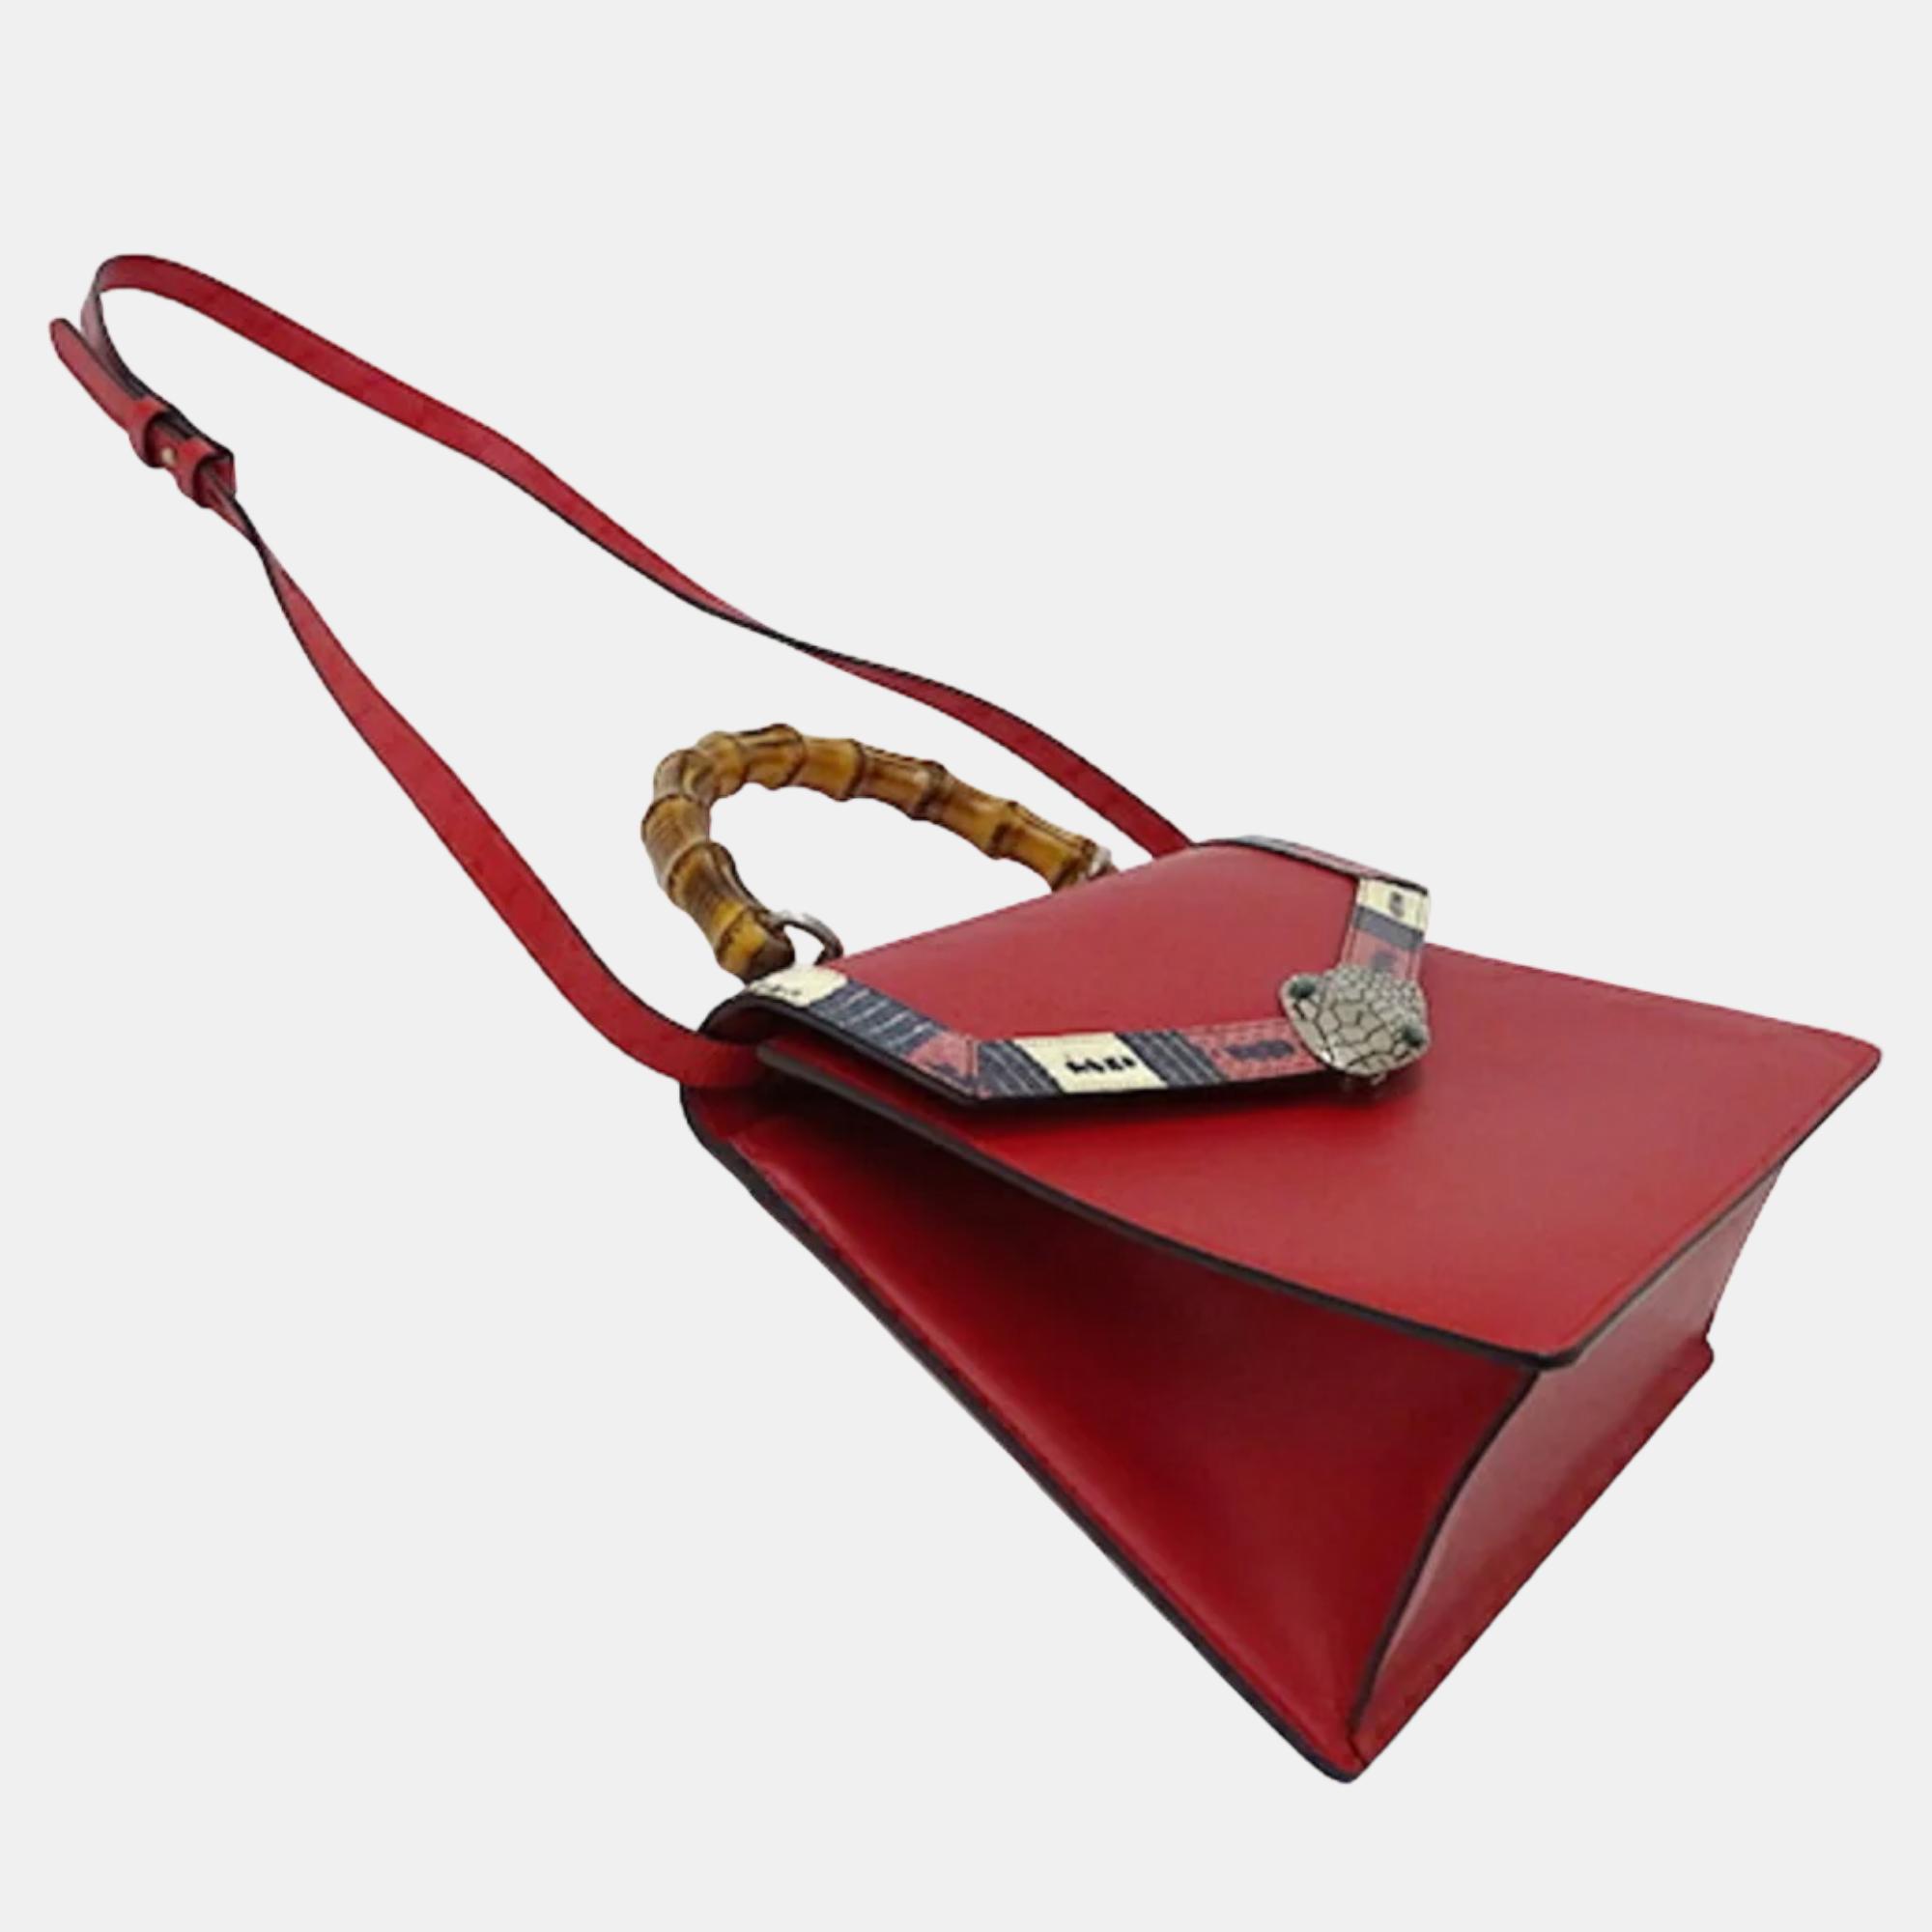 Gucci Red Leather Medium Snakeskin-Trimmed Lilith Top Handle Bag